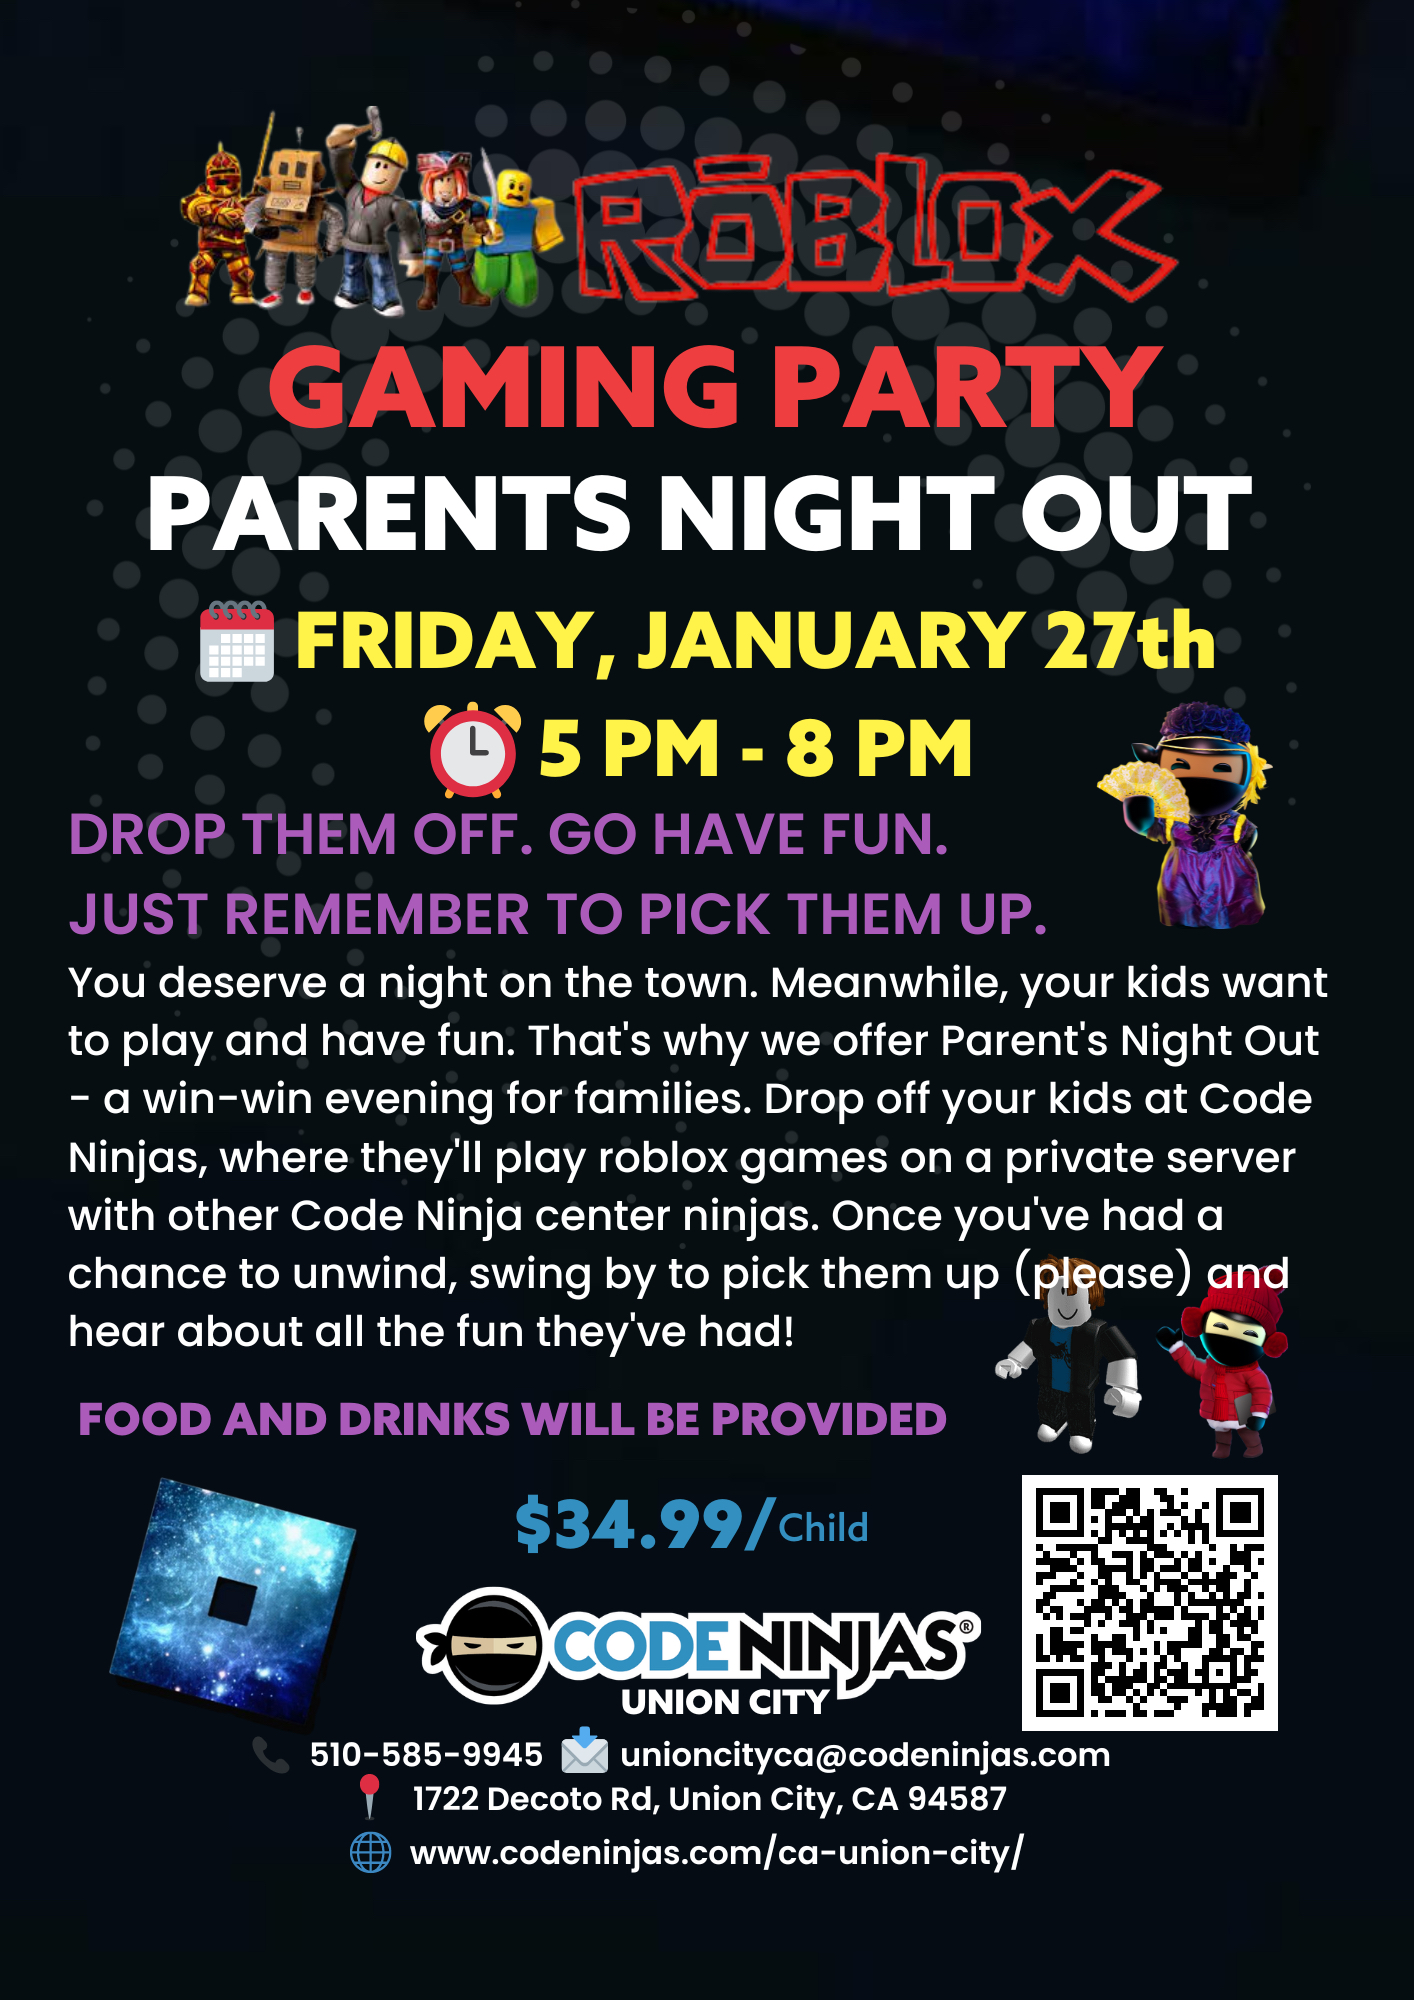 Roblox Gaming Party Parents Night Out with Code Ninjas Union City